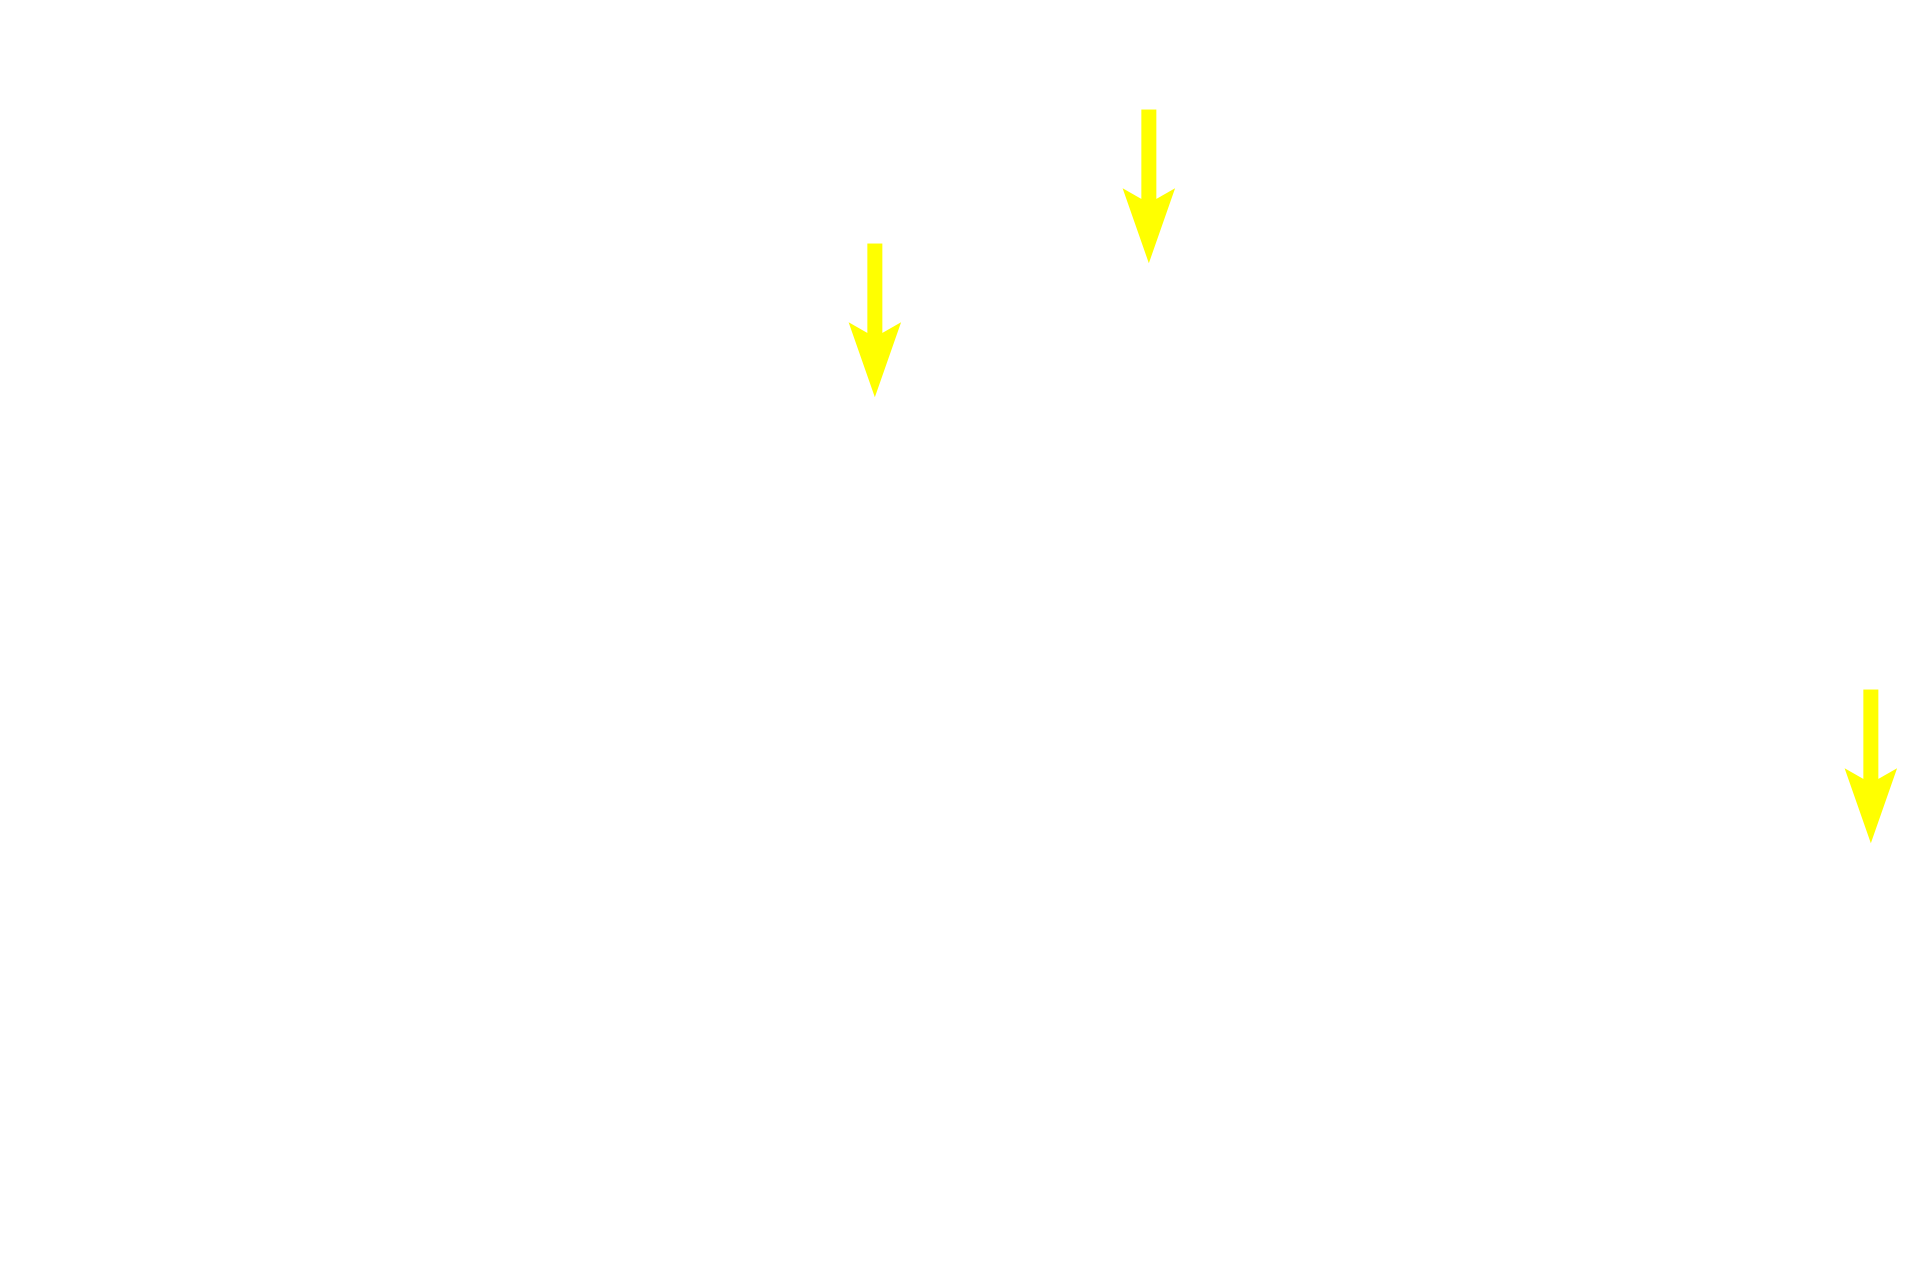  - Acinar lumens <p>Serous secretions are released into the lumen of the acinus and continue into the smaller of the intralobular ducts, the intercalated ducts.  Intercalated ducts are initially lined by simple squamous epithelium which quickly becomes simple cuboidal.  Intercalated ducts are smaller in diameter than the acini.  The point where two acini empty into an intercalated duct is visible in this image.  600x</p>
